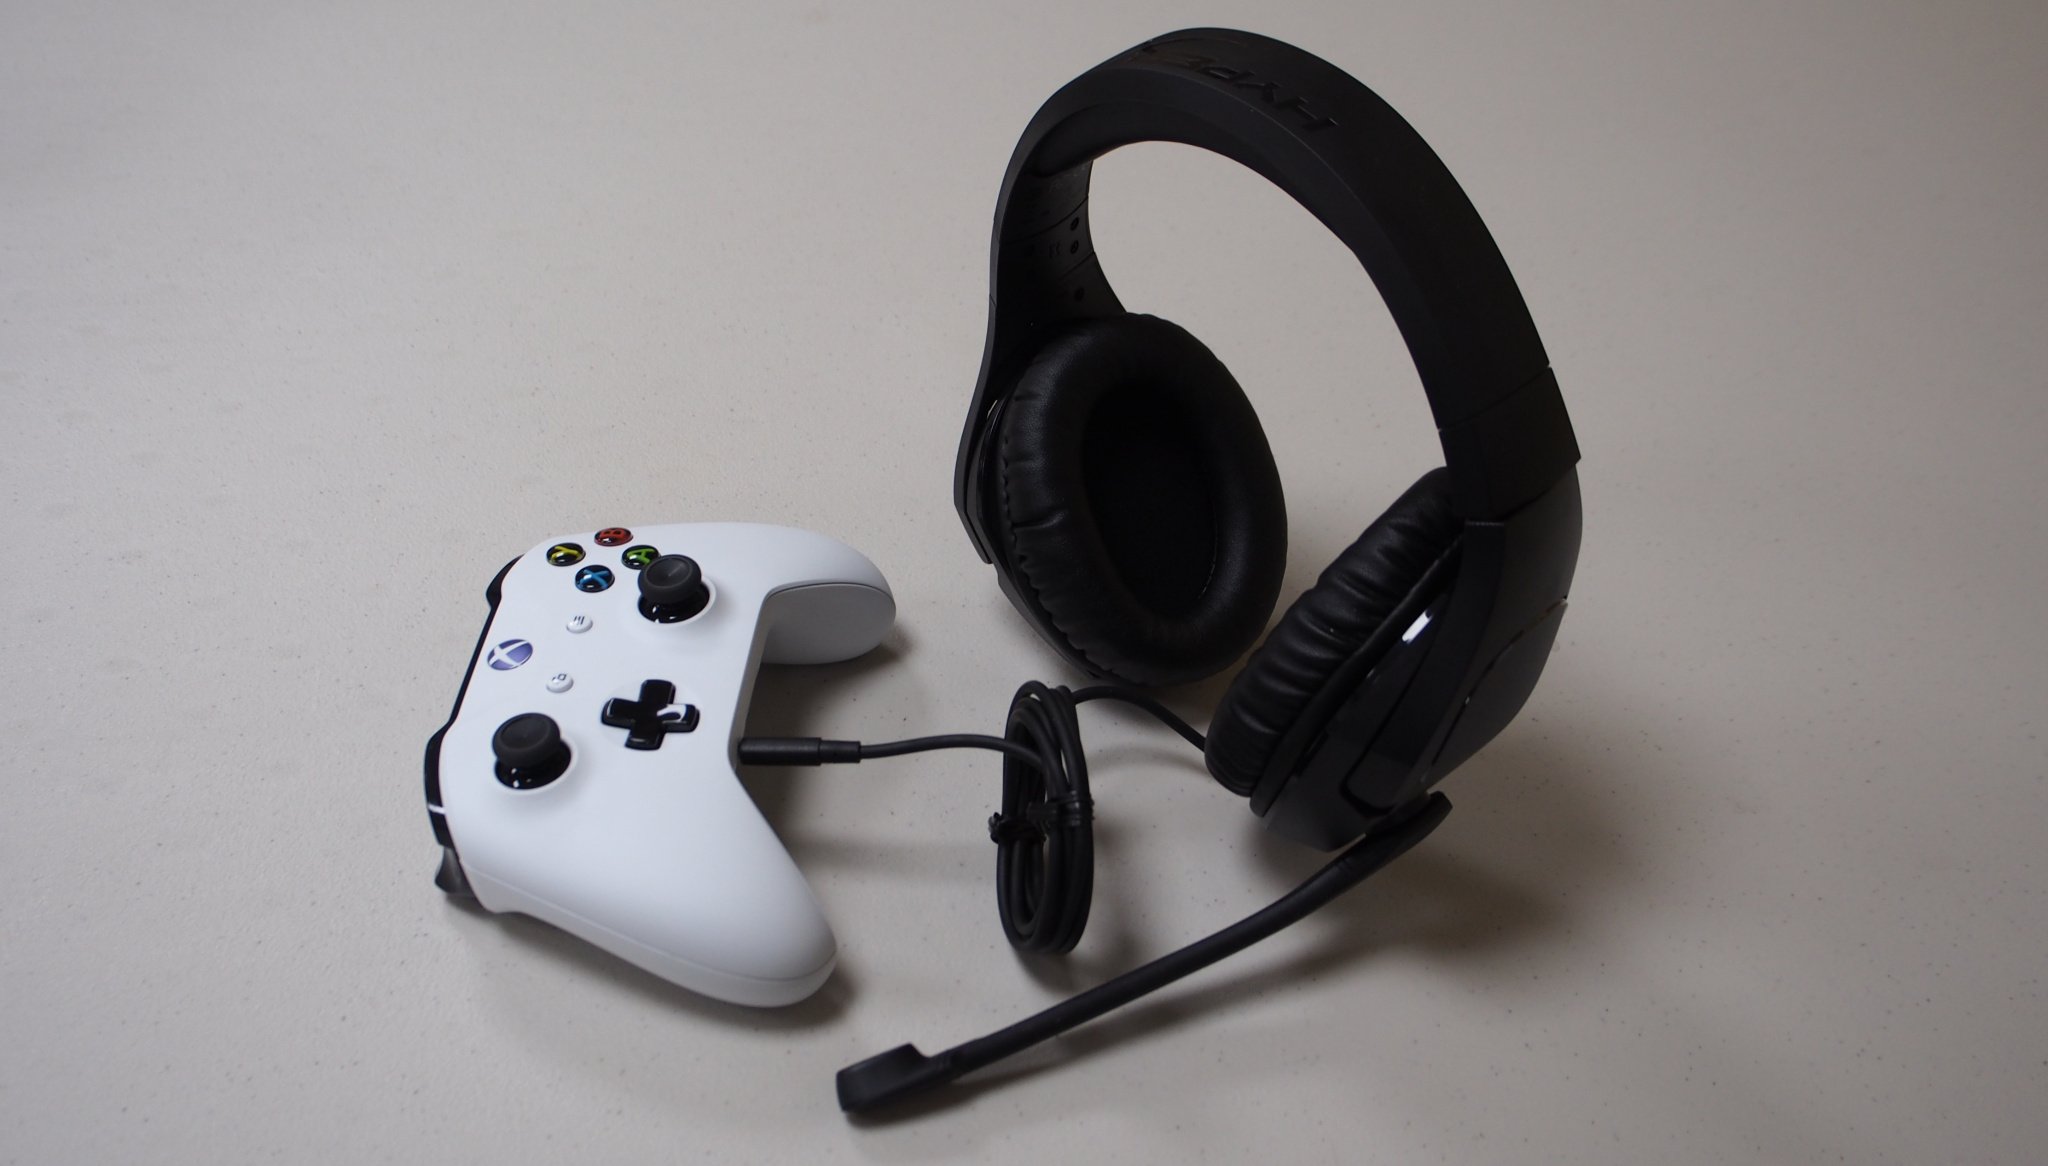 HyperX headset and Xbox controller